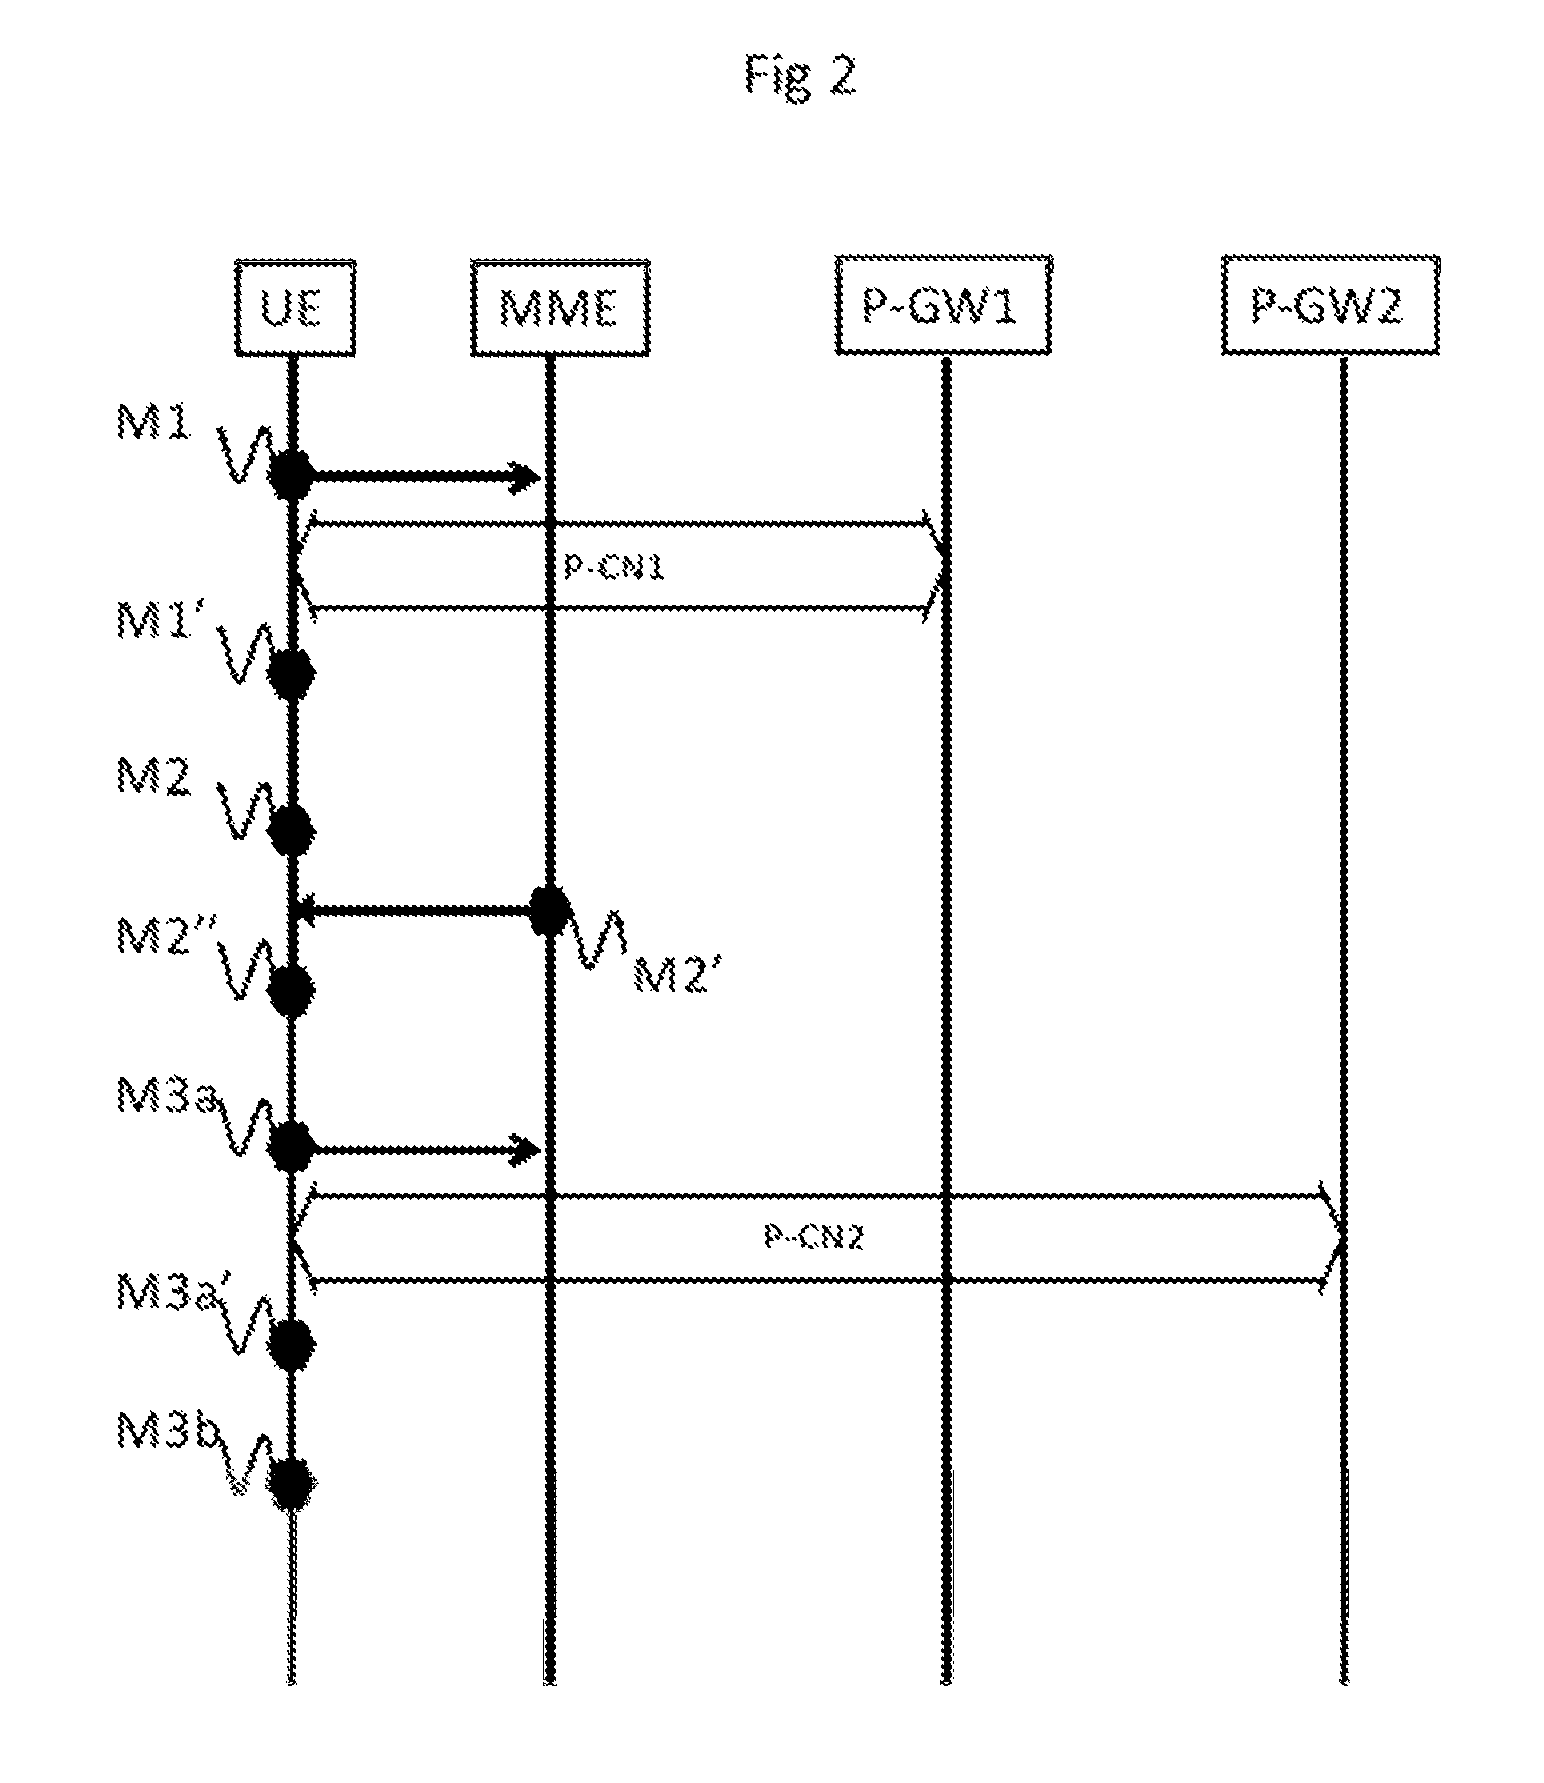 Mechanism for managing PDN connections in LTE/EPC networks